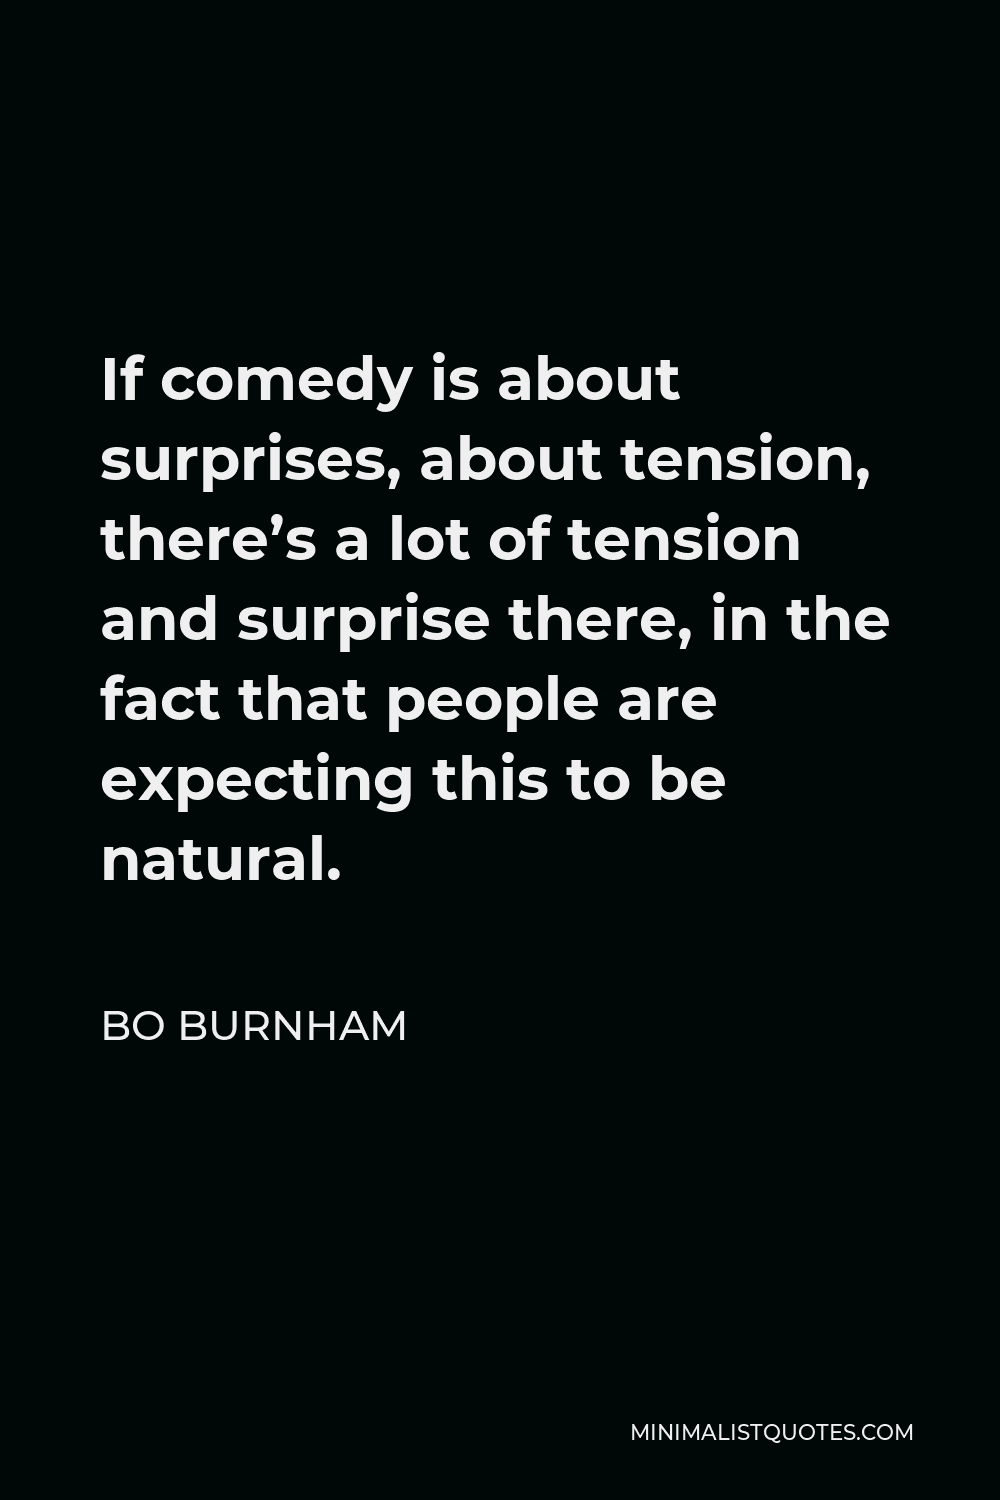 Bo Burnham Quote - If comedy is about surprises, about tension, there’s a lot of tension and surprise there, in the fact that people are expecting this to be natural.